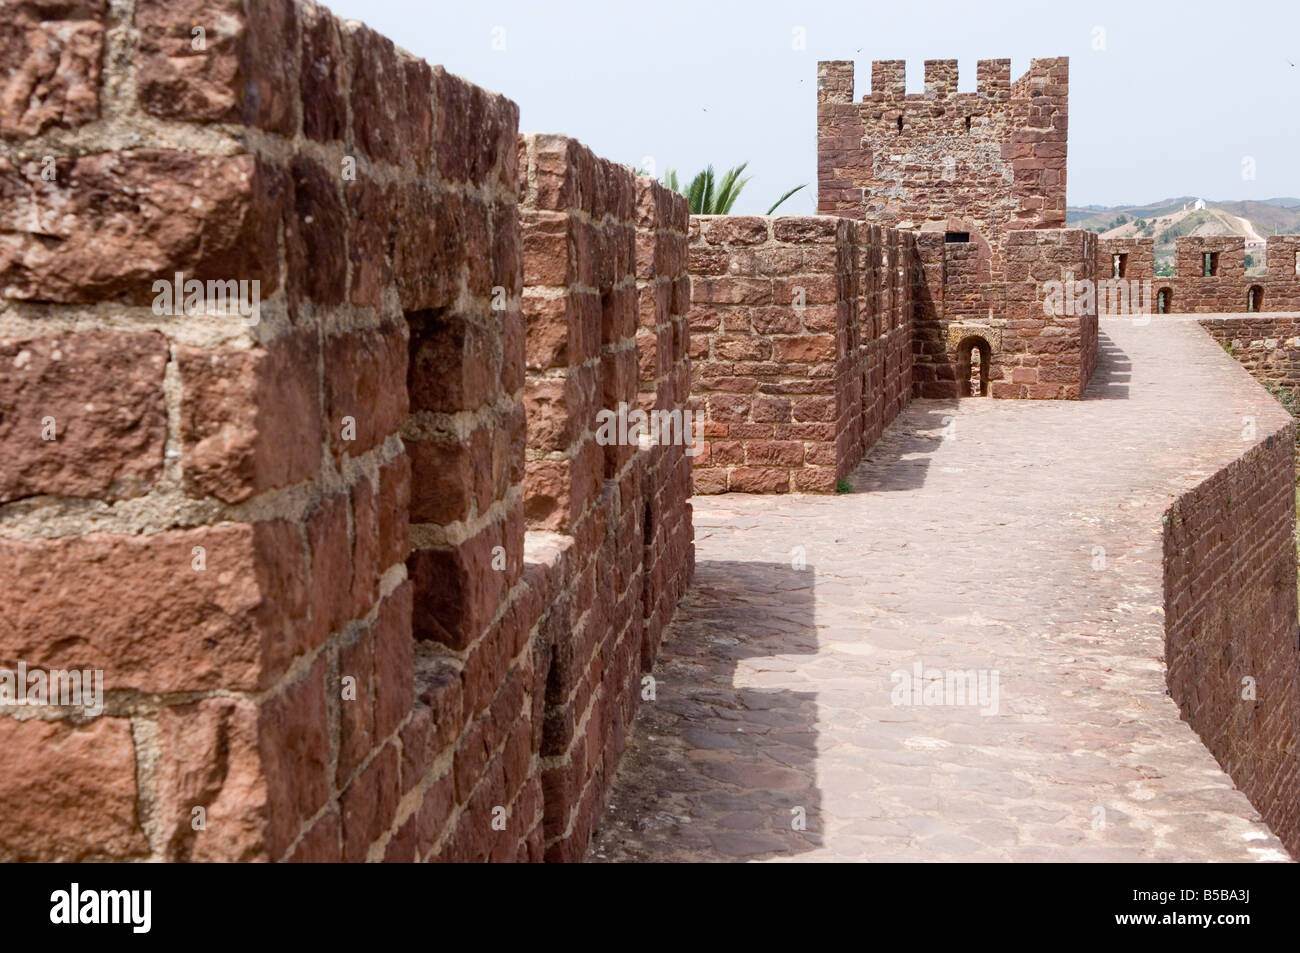 The largest castle in the Algarve, the ramparts, late Roman or Visigothic fort, Silves, Algarve, Portugal Stock Photo